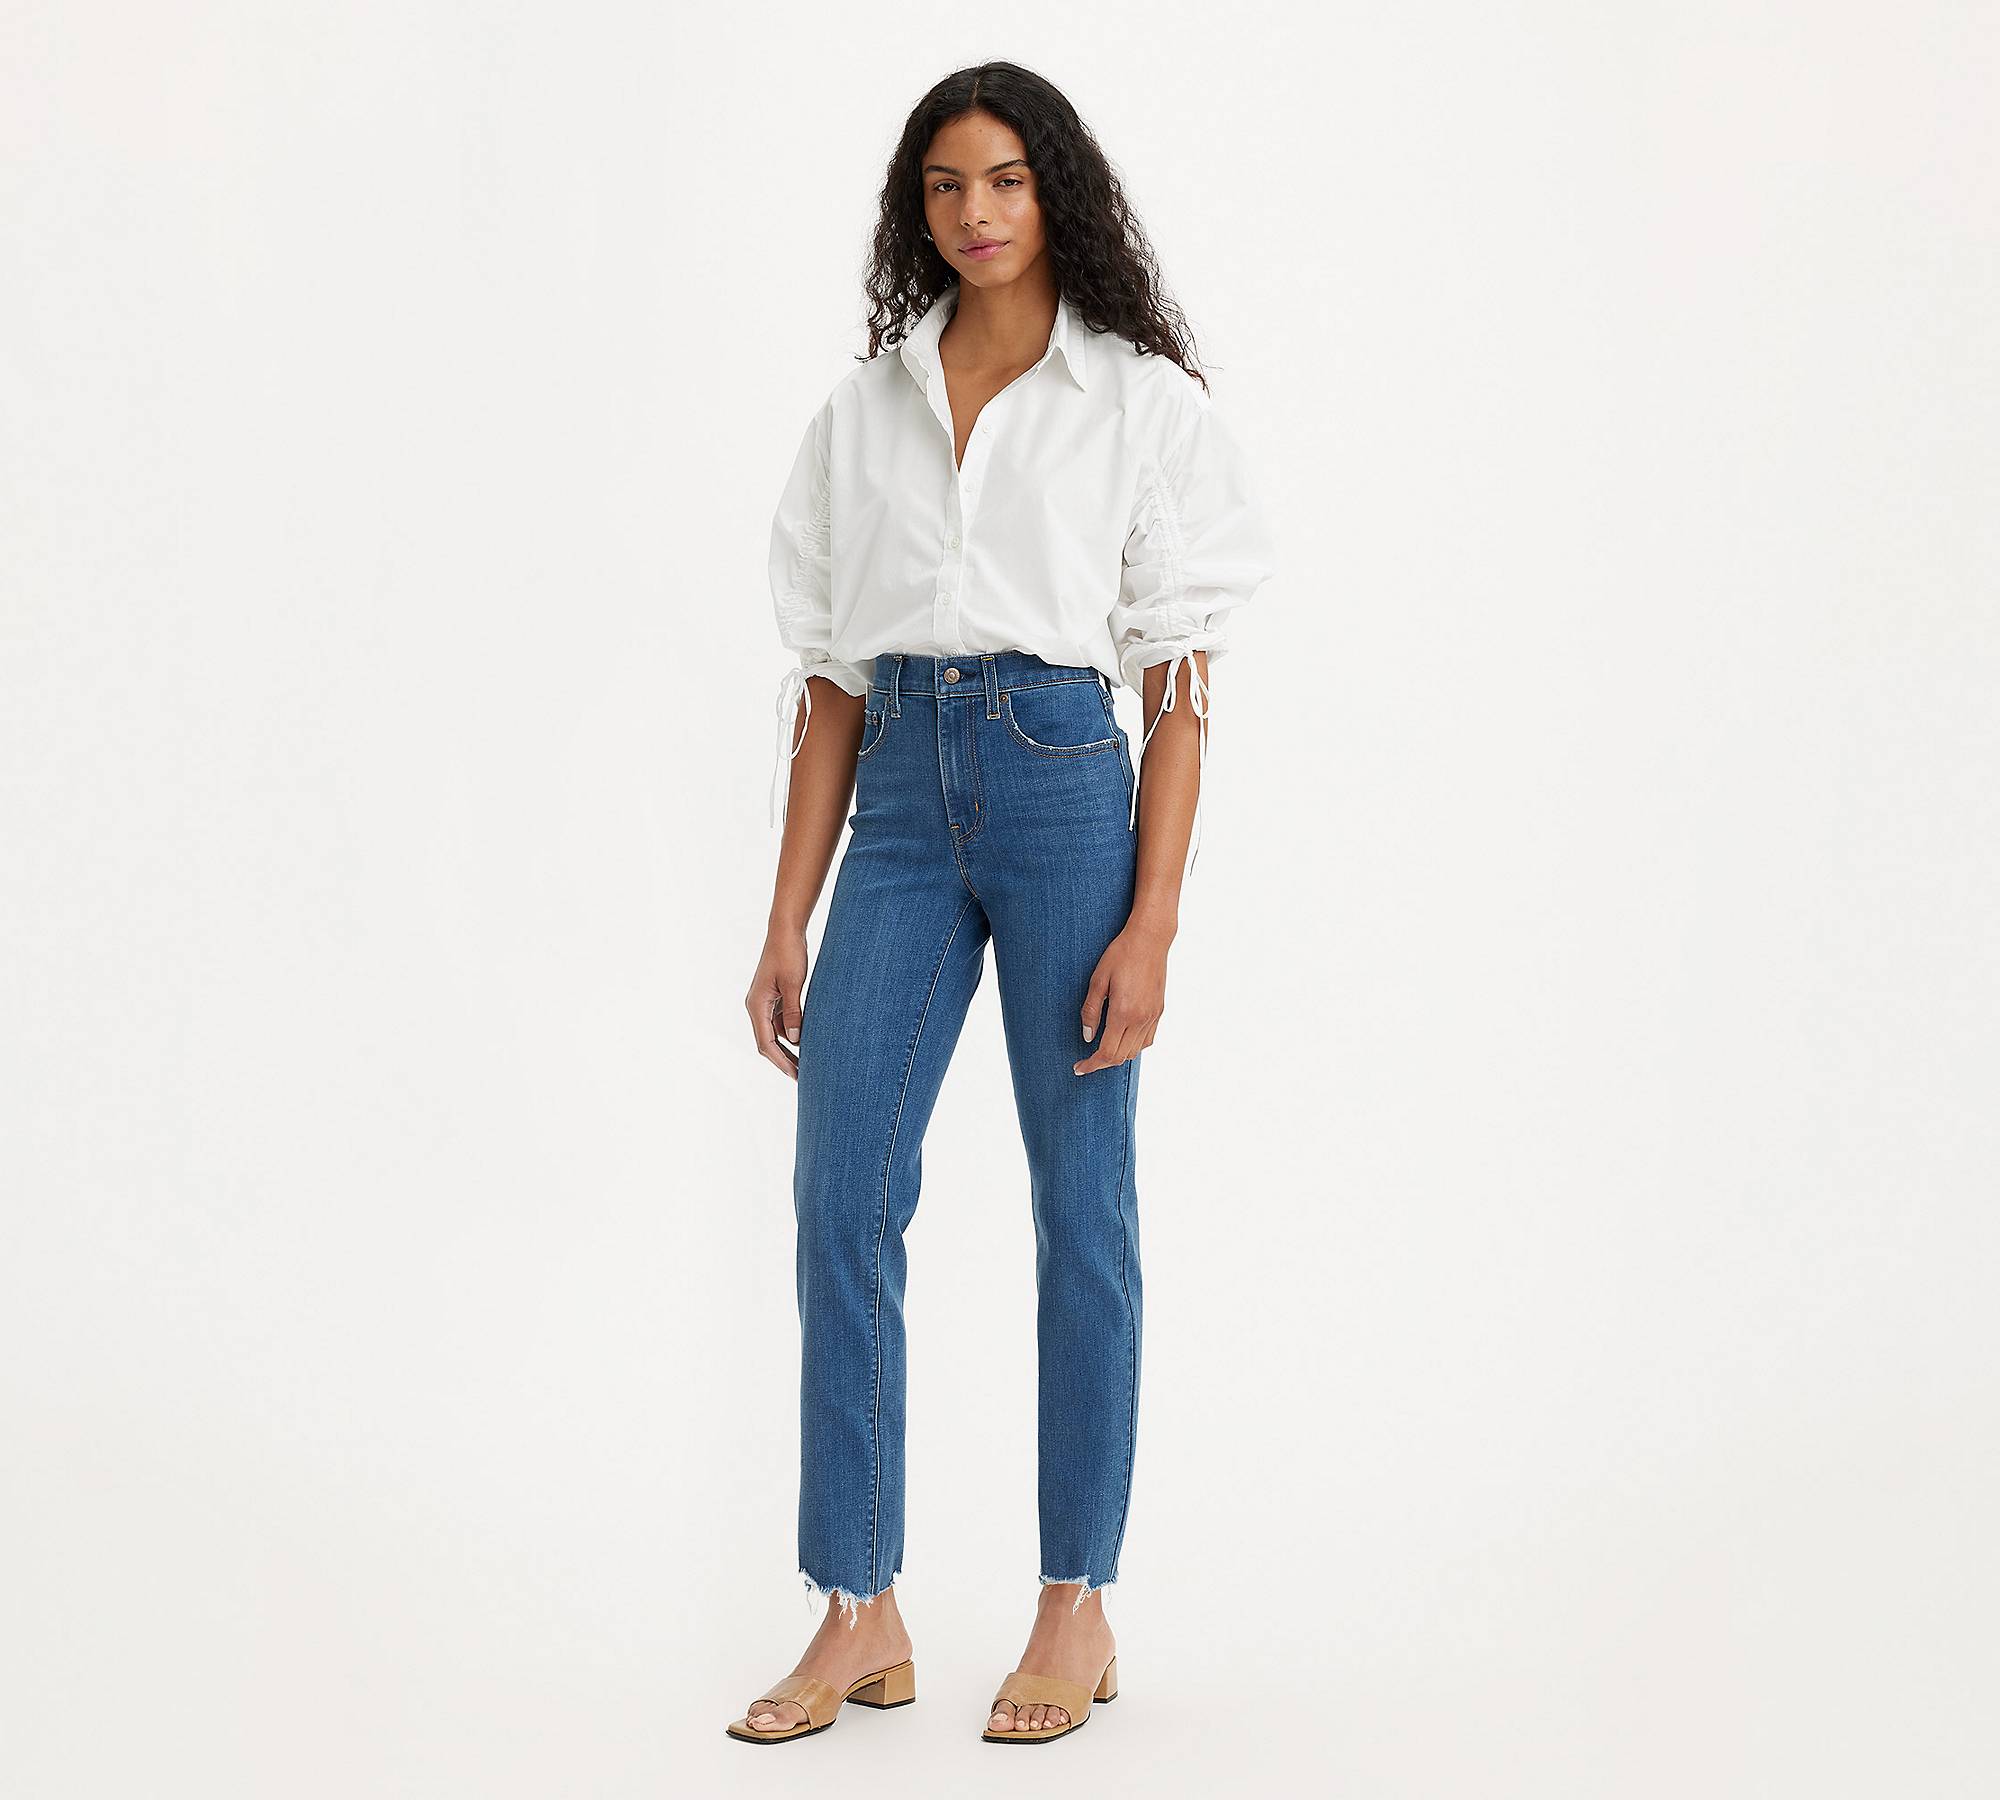 724 High Rise Slim Straight Cropped Women's Jeans - Dark Wash | Levi's® US